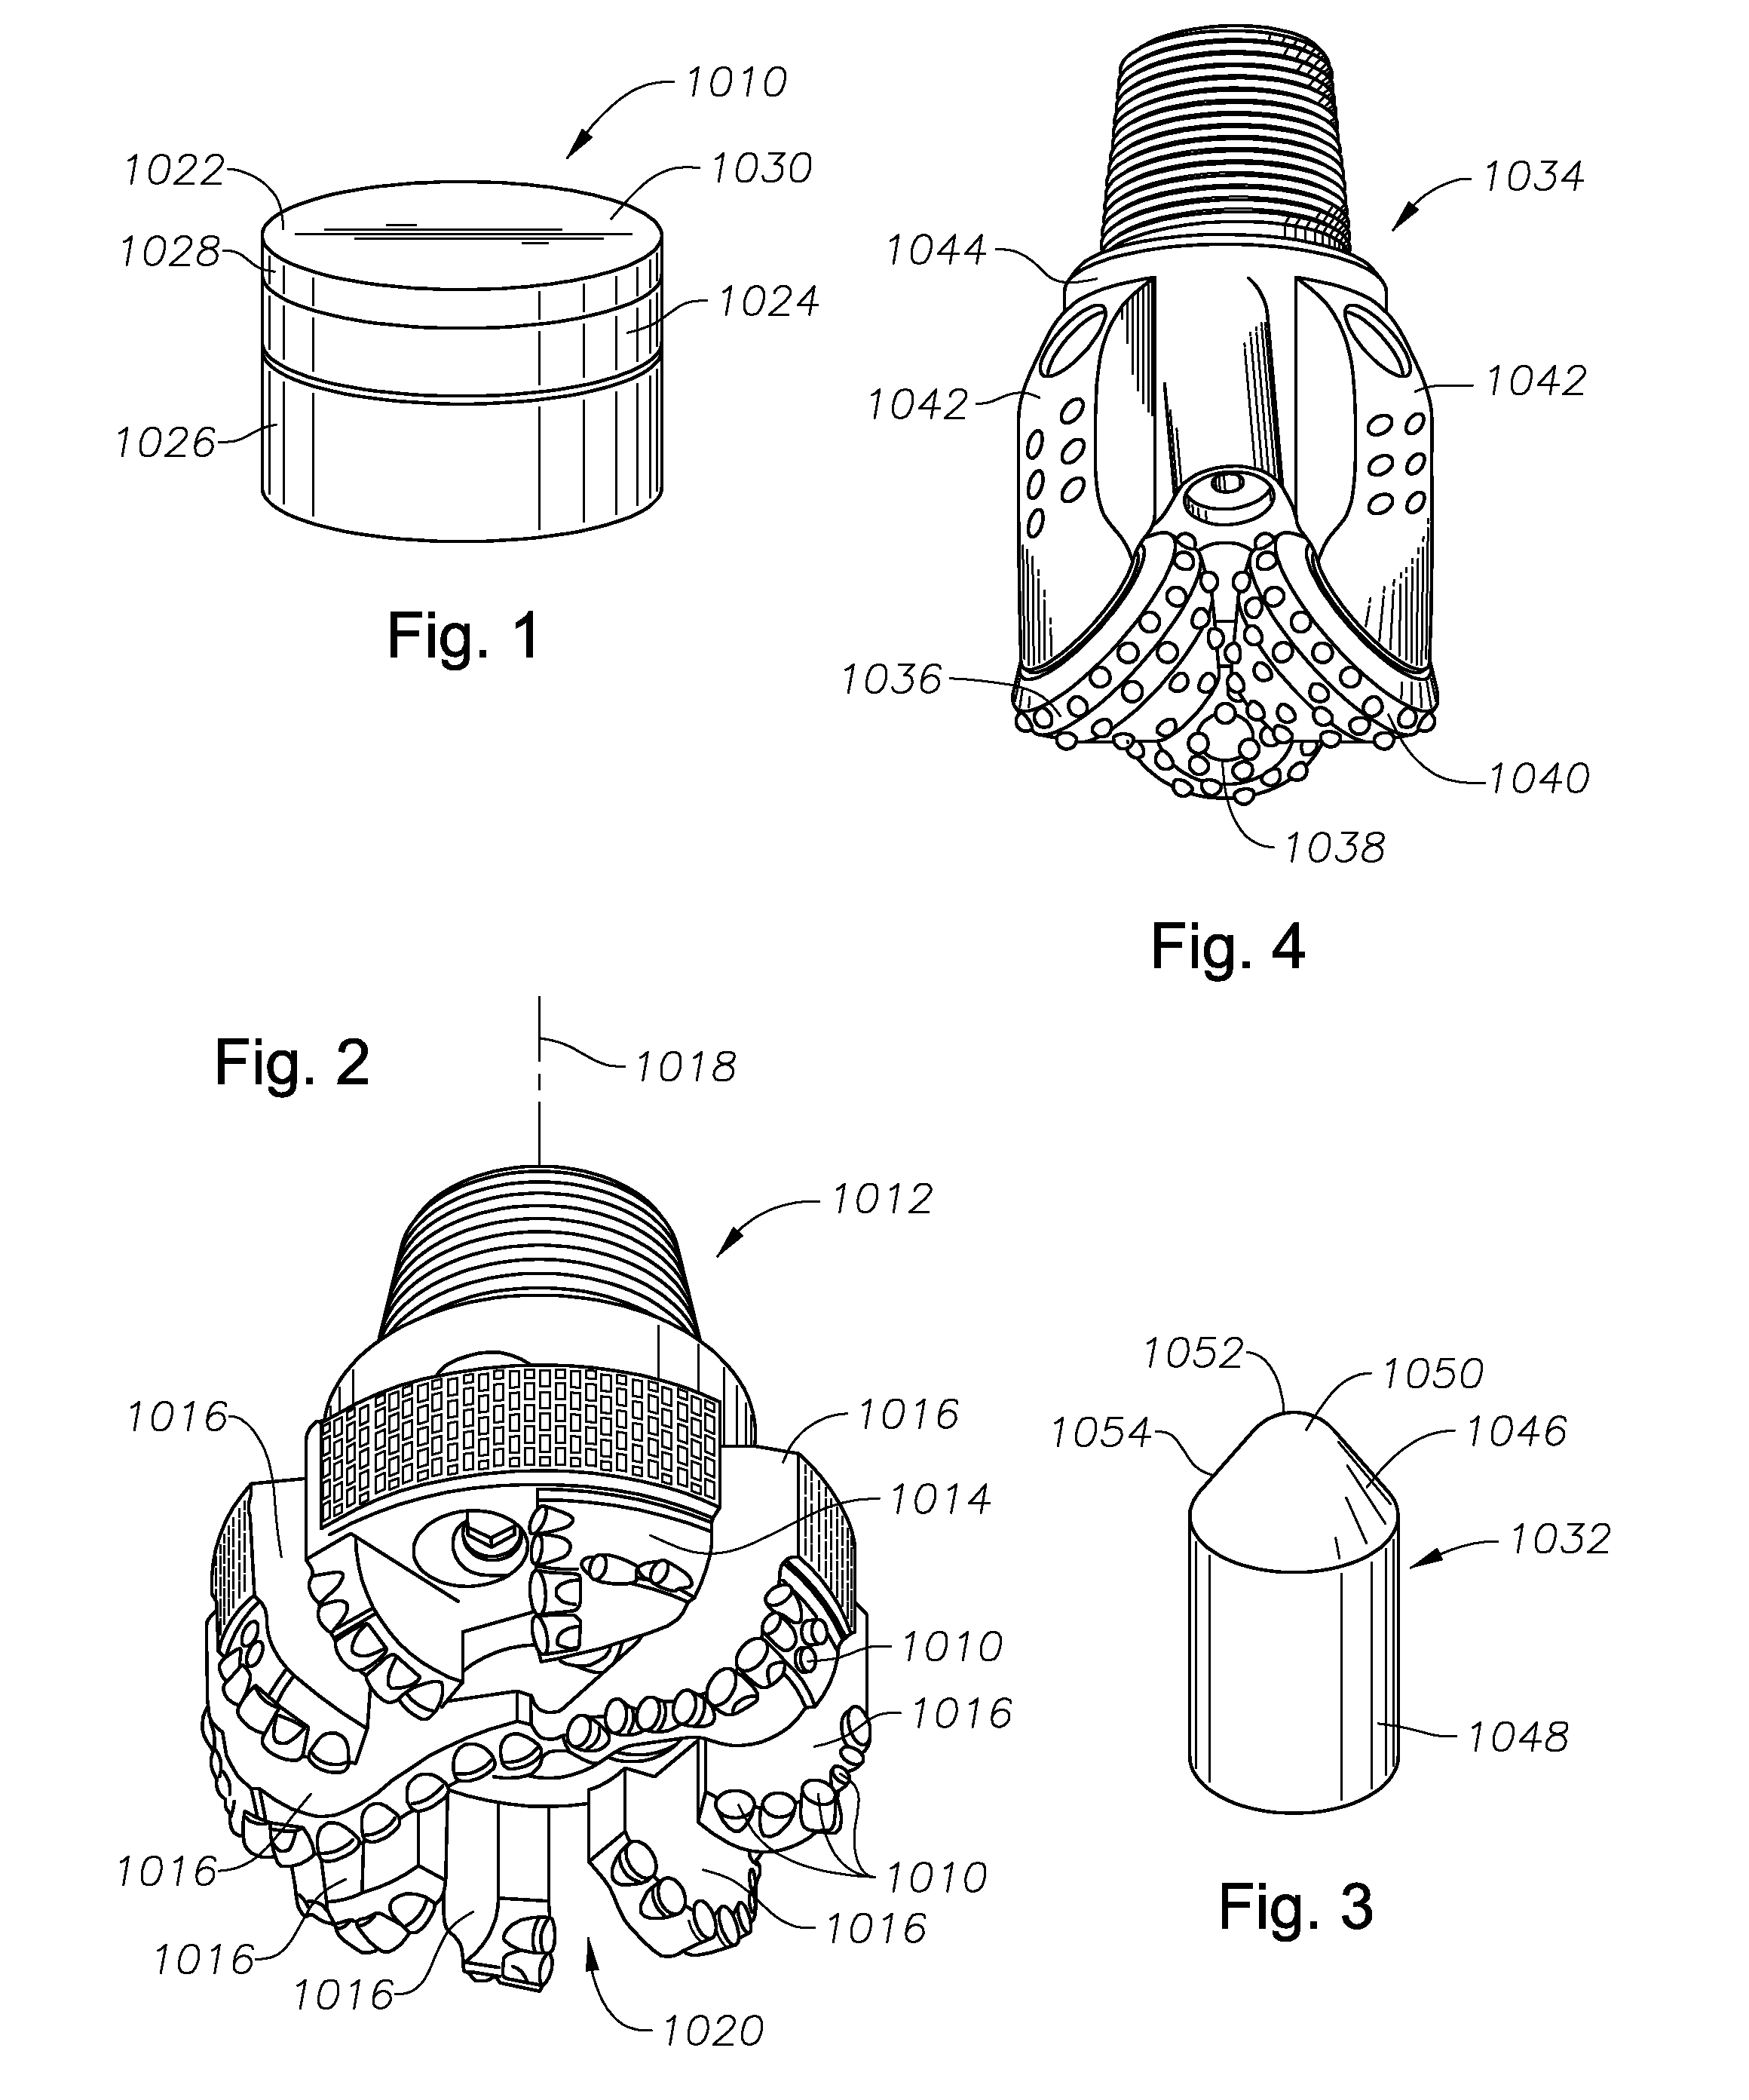 Multi-Edge Working Surfaces for Polycrystalline Diamond Cutting Elements